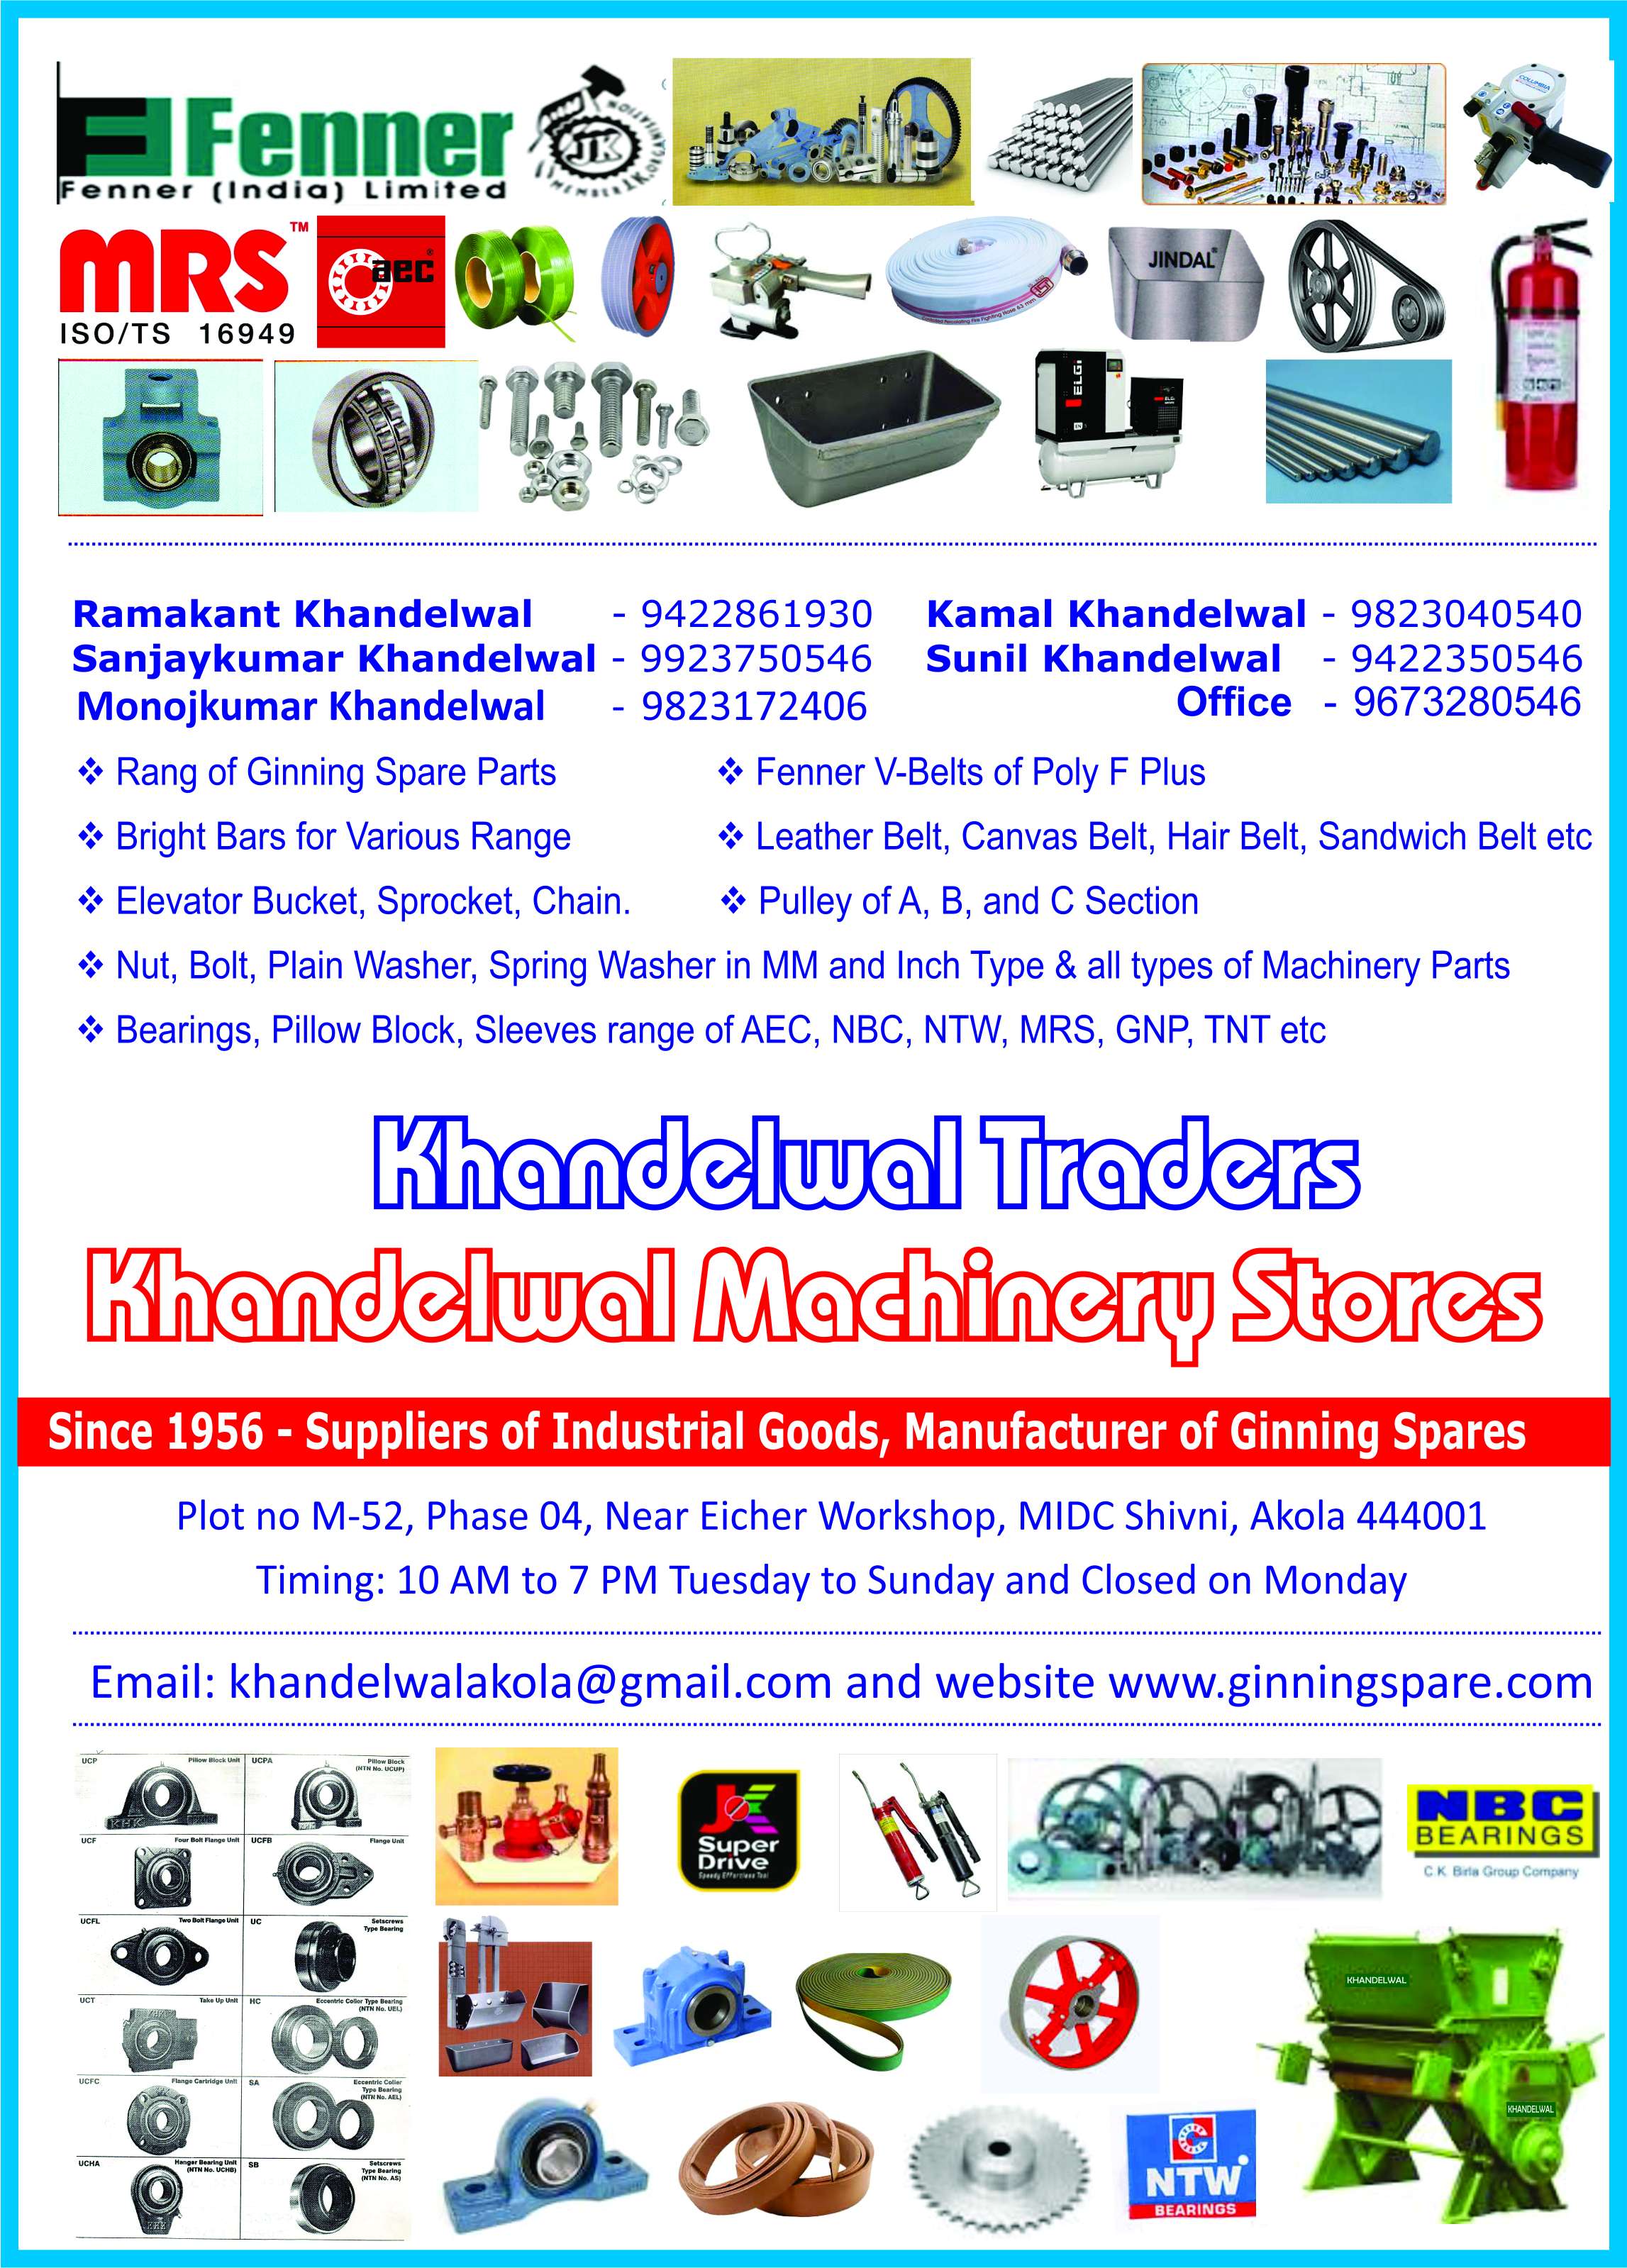 Khandelwal Machinery Stores